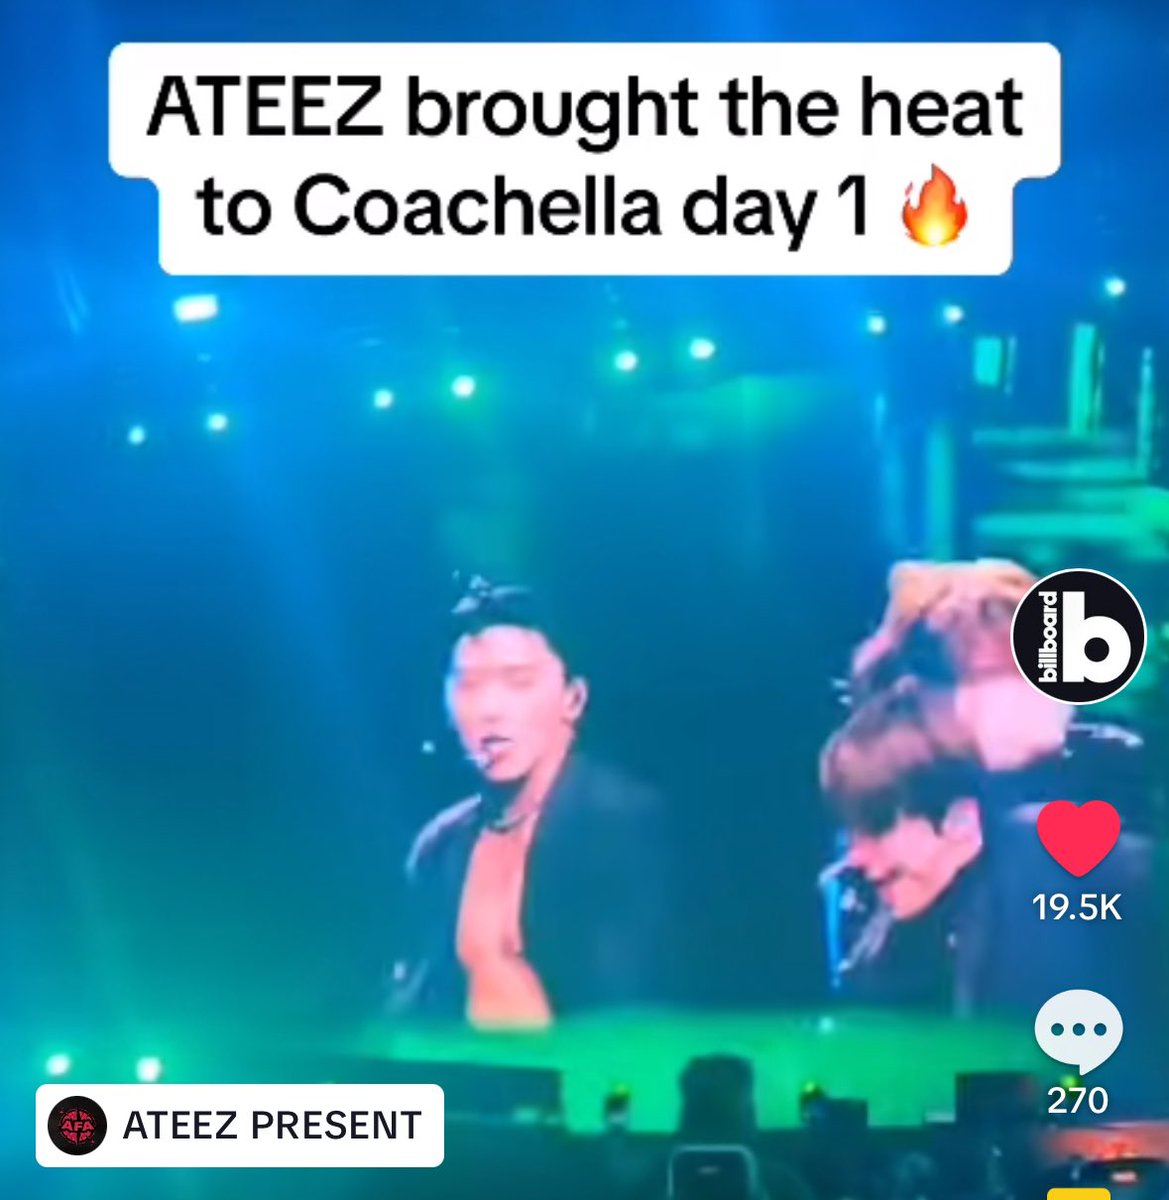 The official @billboard account had posted ATEEZ ‘Bouncy’ performance from day 1 Coachella🔥🌶️ 

How about viewing, commenting and sharing the link! Show ATINY present! 
🔗 tiktok.com/t/ZTLyqT8kP/

#CHELLATEEZ  #ATEEZatCOACHELLA #ATEEZ #Coachella @ATEEZofficial